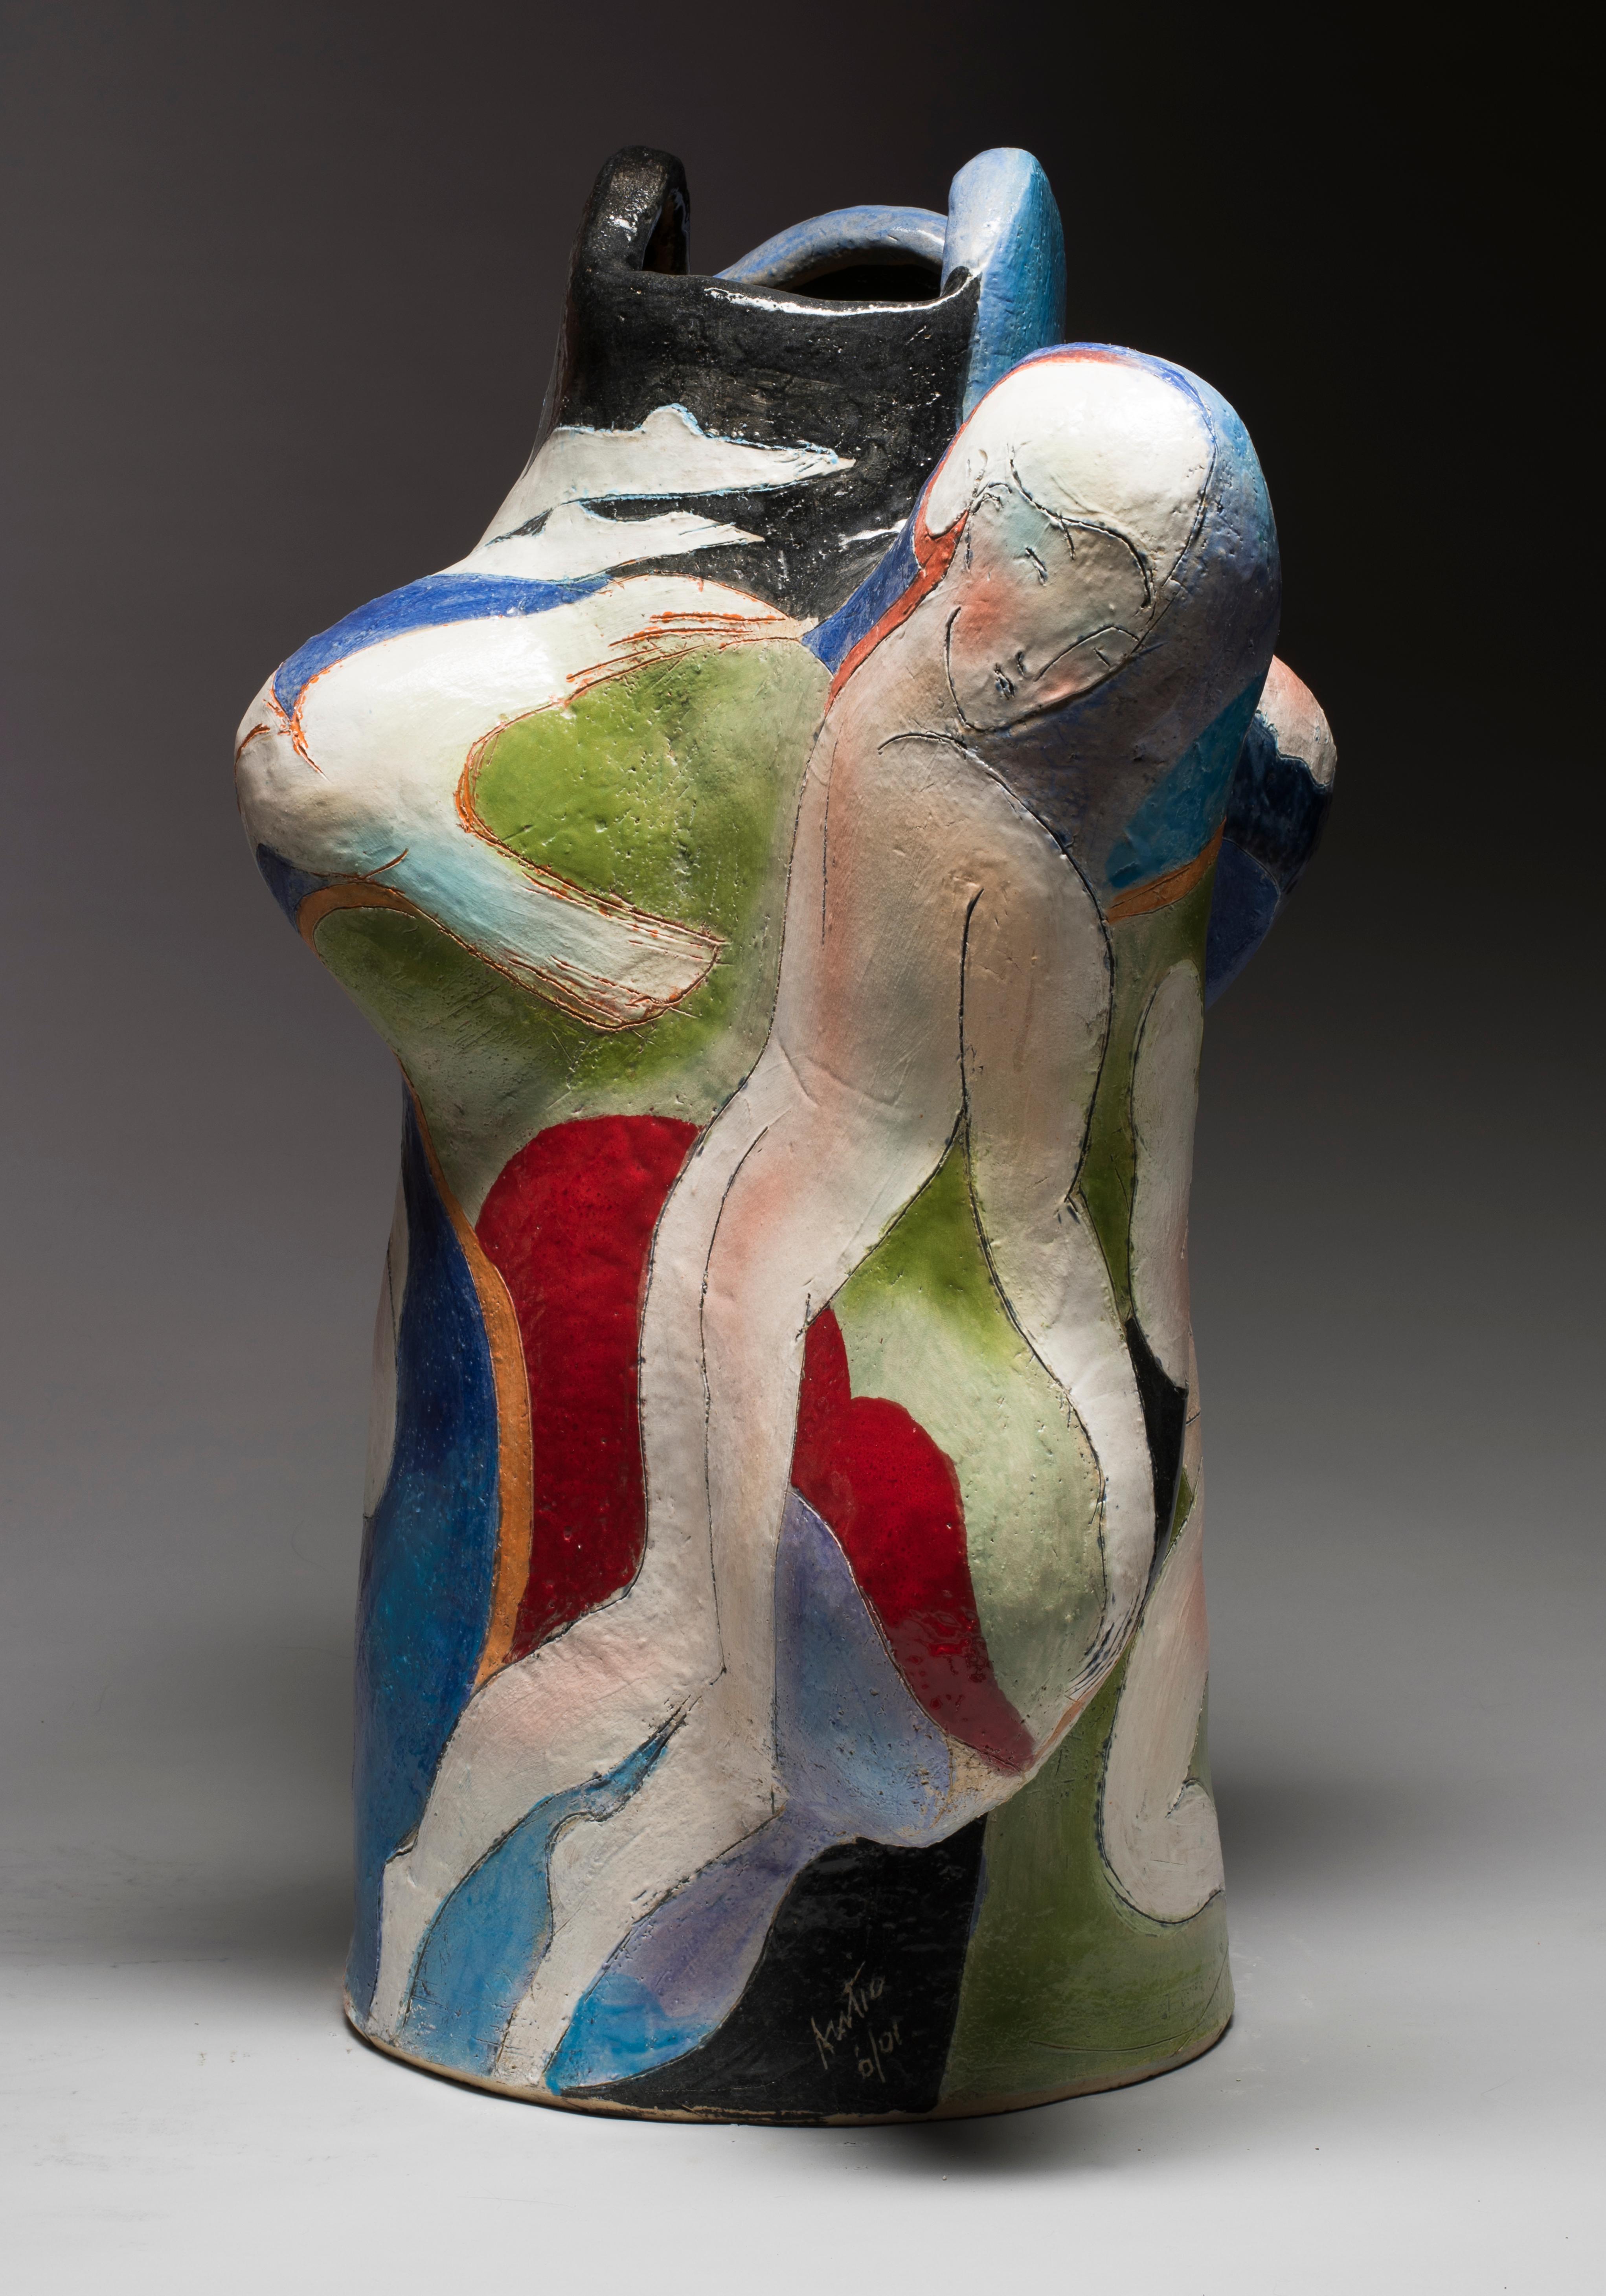 Rudy Autio was one of the most influential artists working in clay over the last fifty years.  A founding resident of the Archie Bray Foudation and 2007 recipient of the James Renwick Alliance’s Master of the Medium for clay, Rudy Autio and his